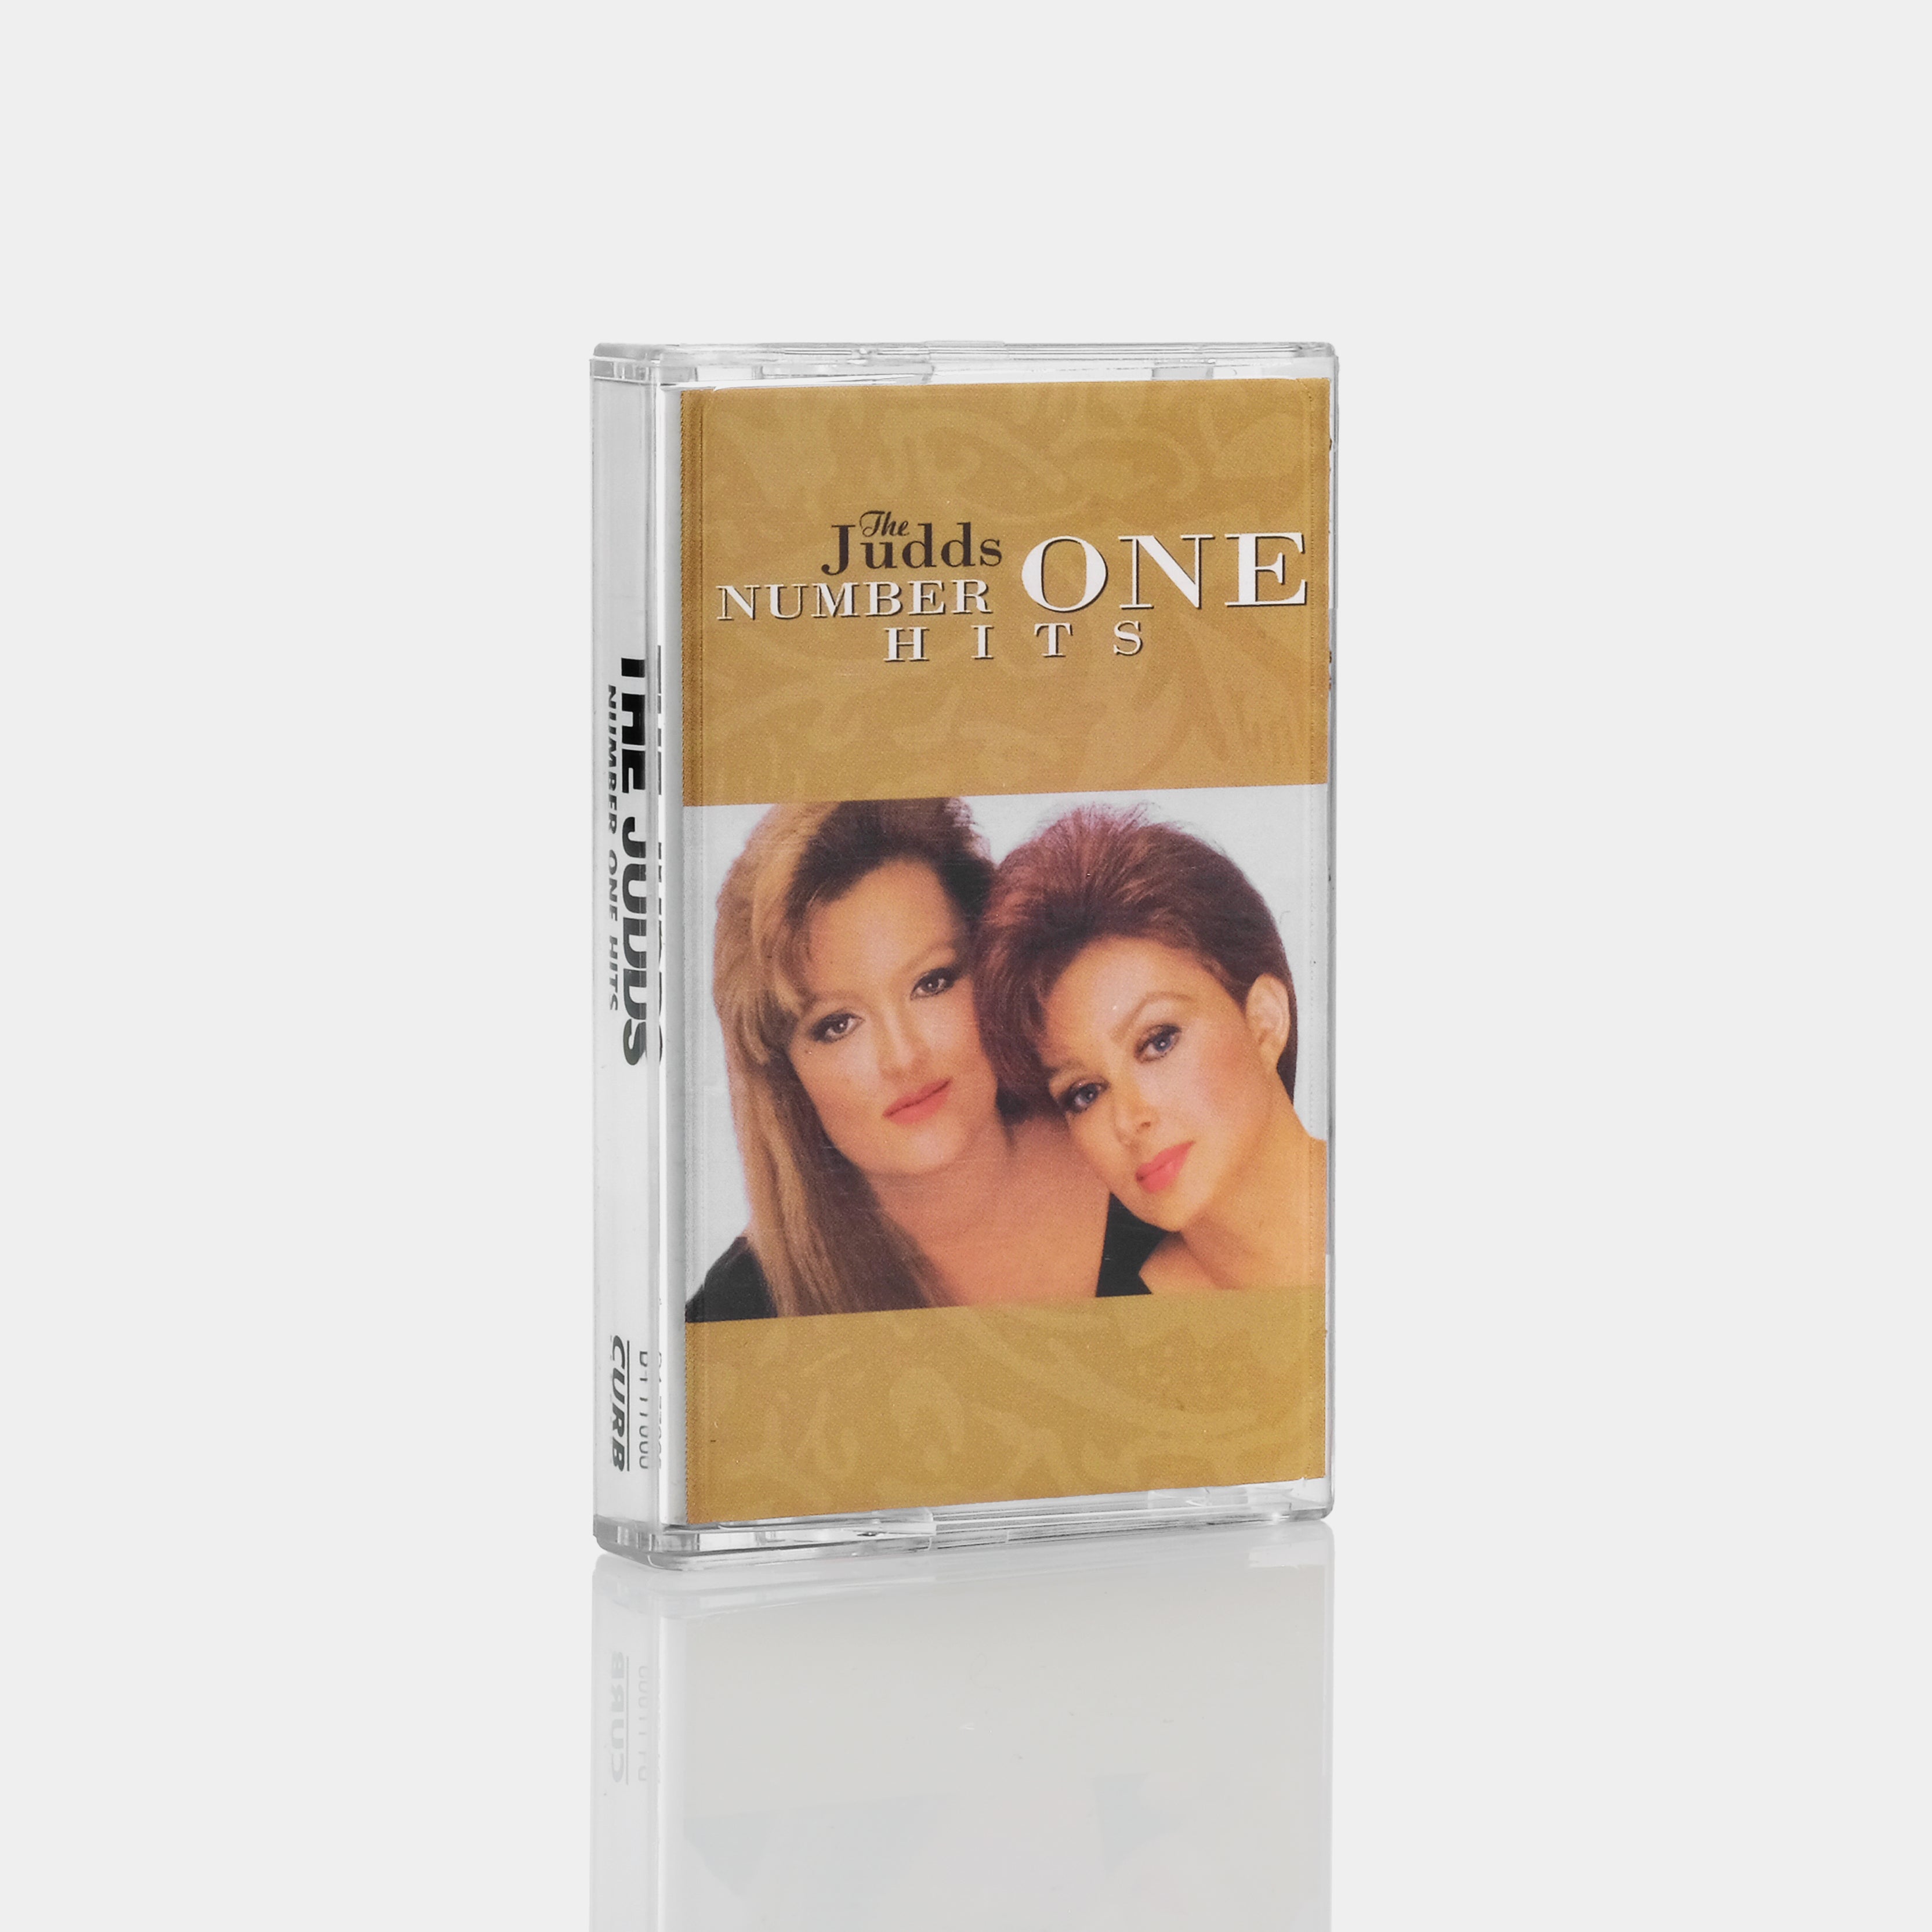 The Judds - Number One Hits Cassette Tape